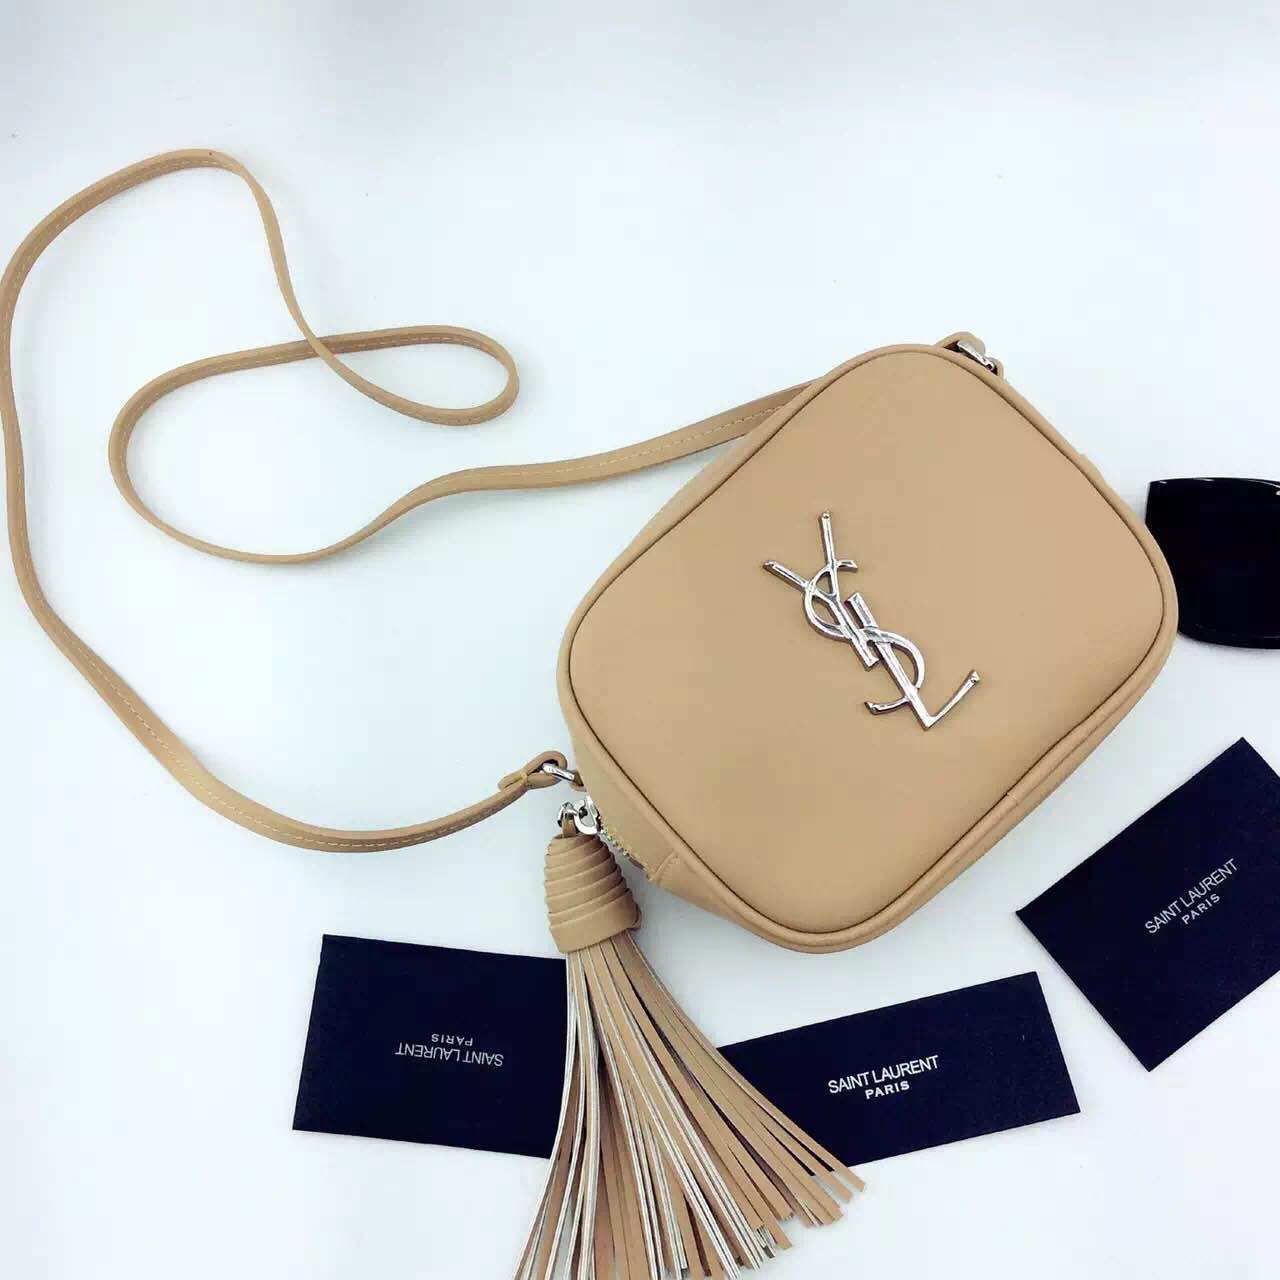 New Arrival!2016 Cheap YSL Out Sale with Free Shipping-Saint Laurent Monogram Medium Blogger Bag in Dark Beige Leather - Click Image to Close